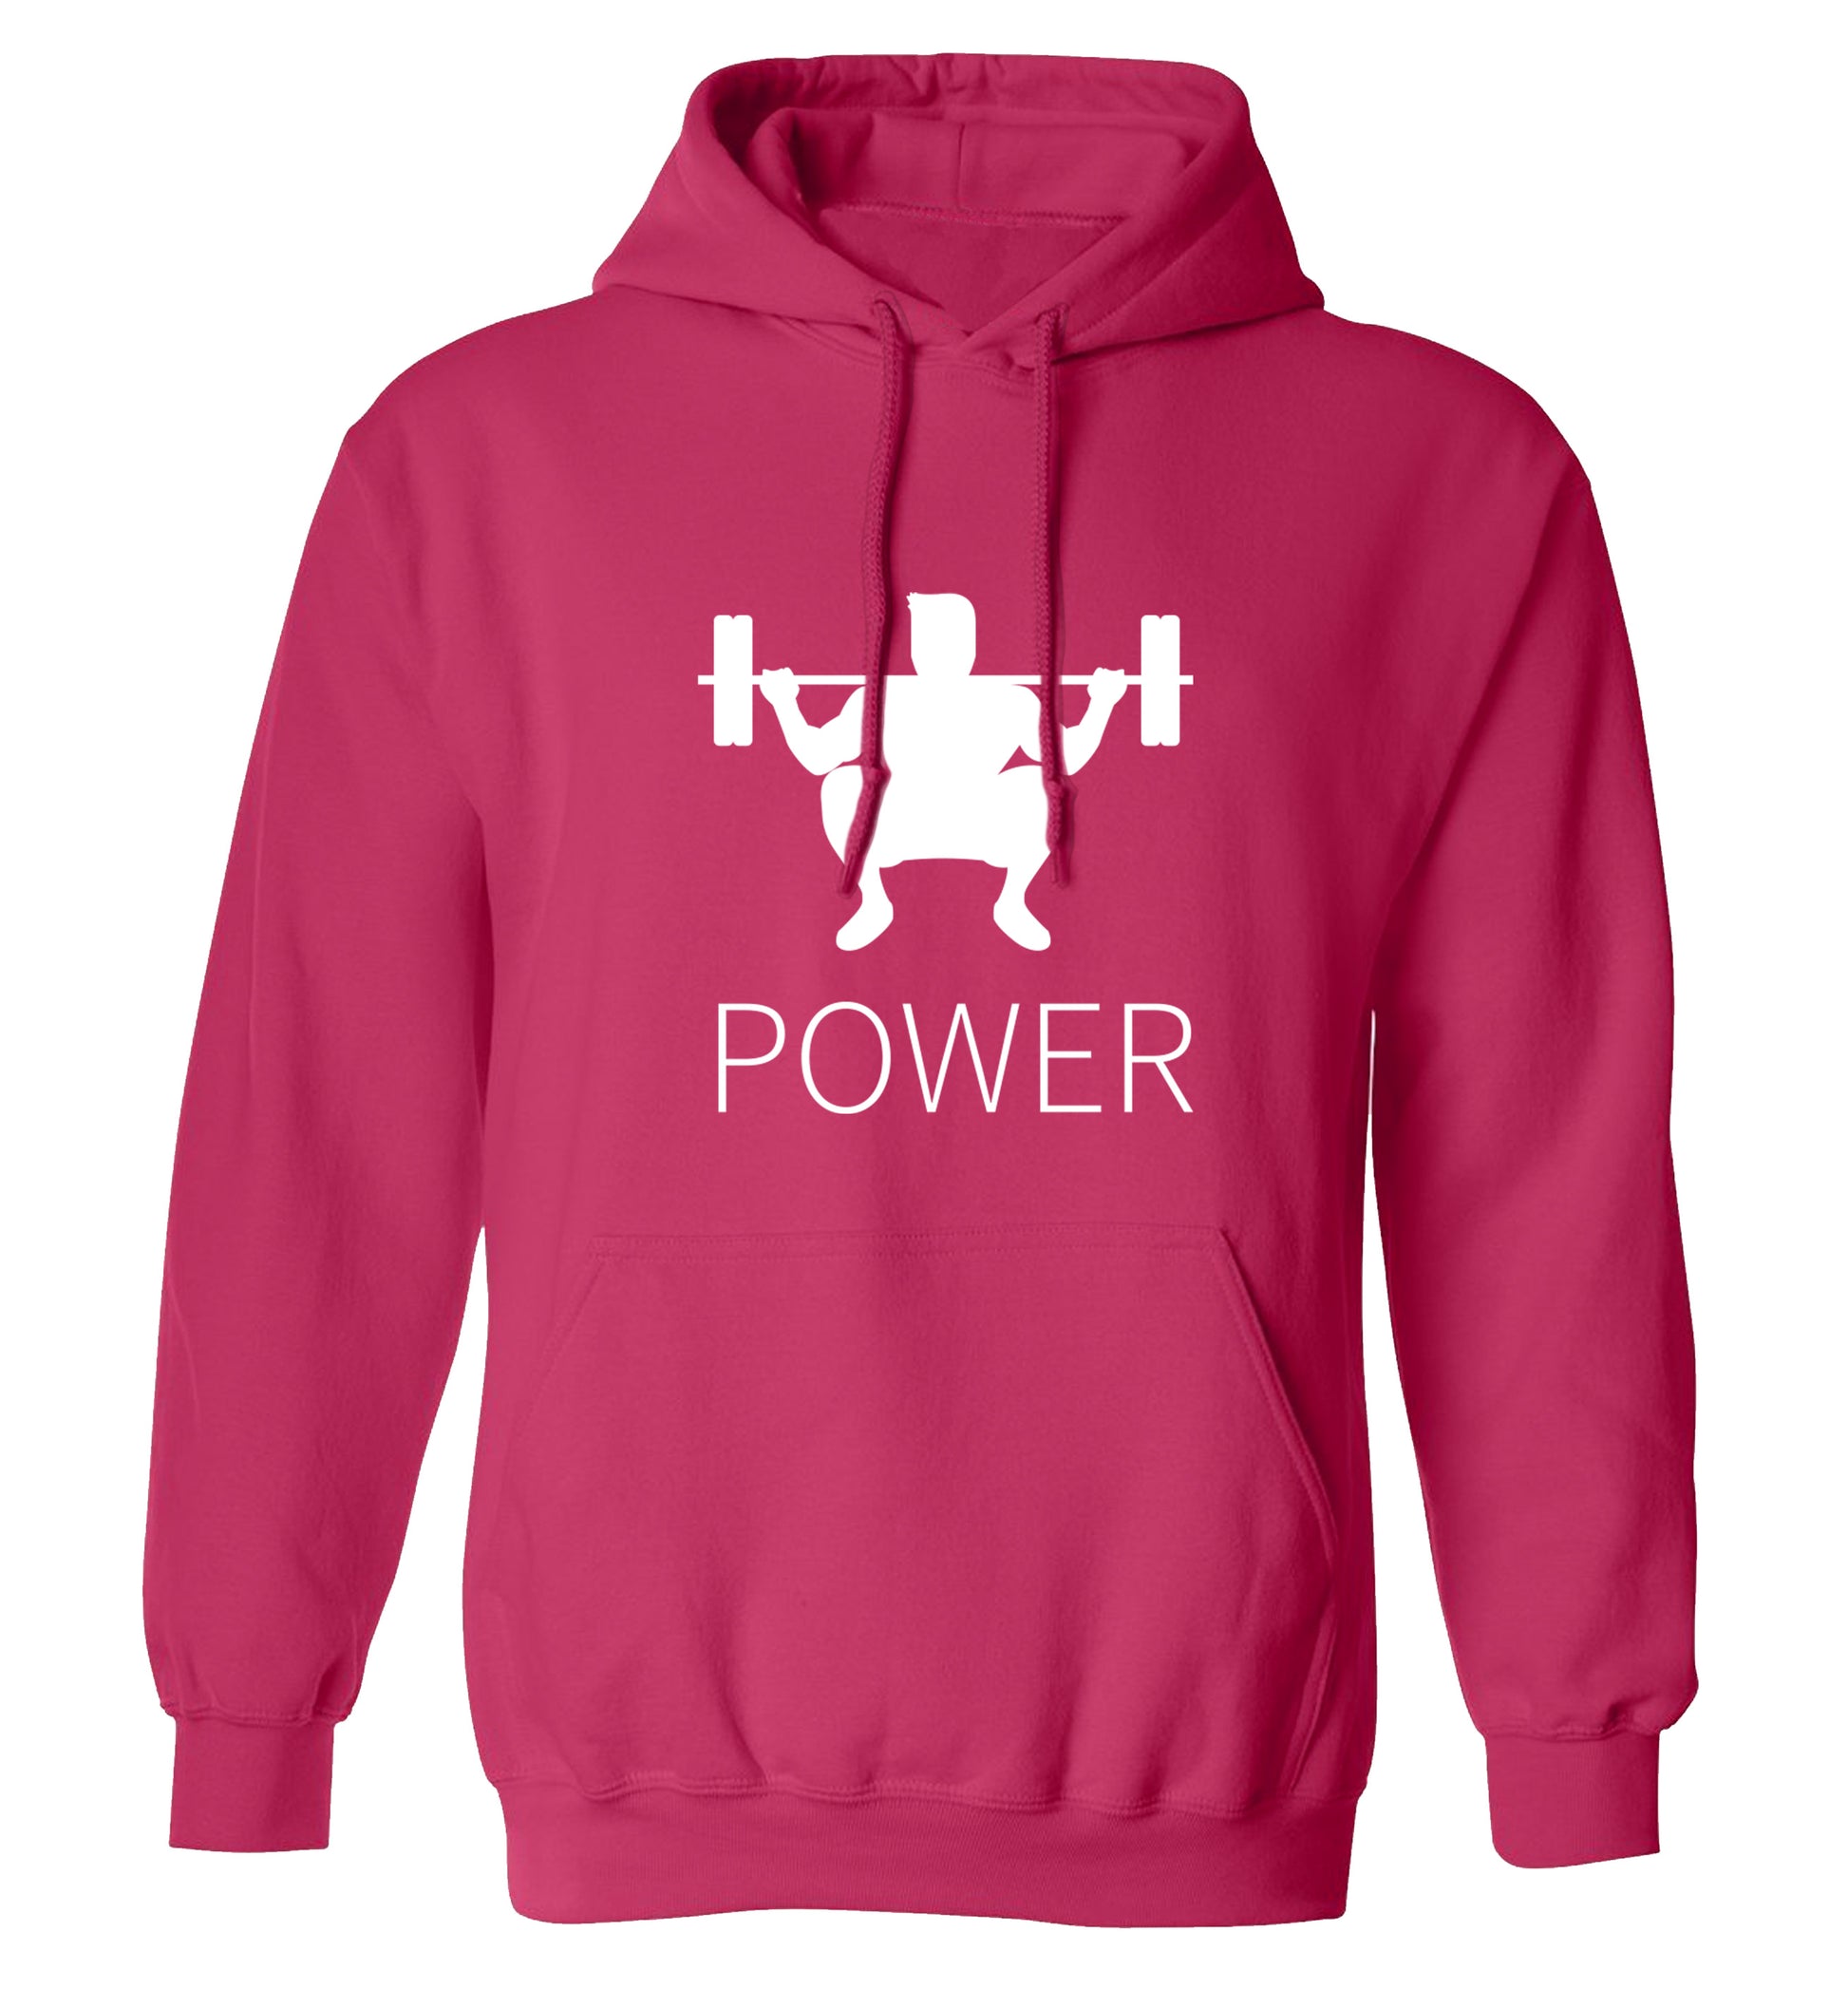 Lift power adults unisex pink hoodie 2XL